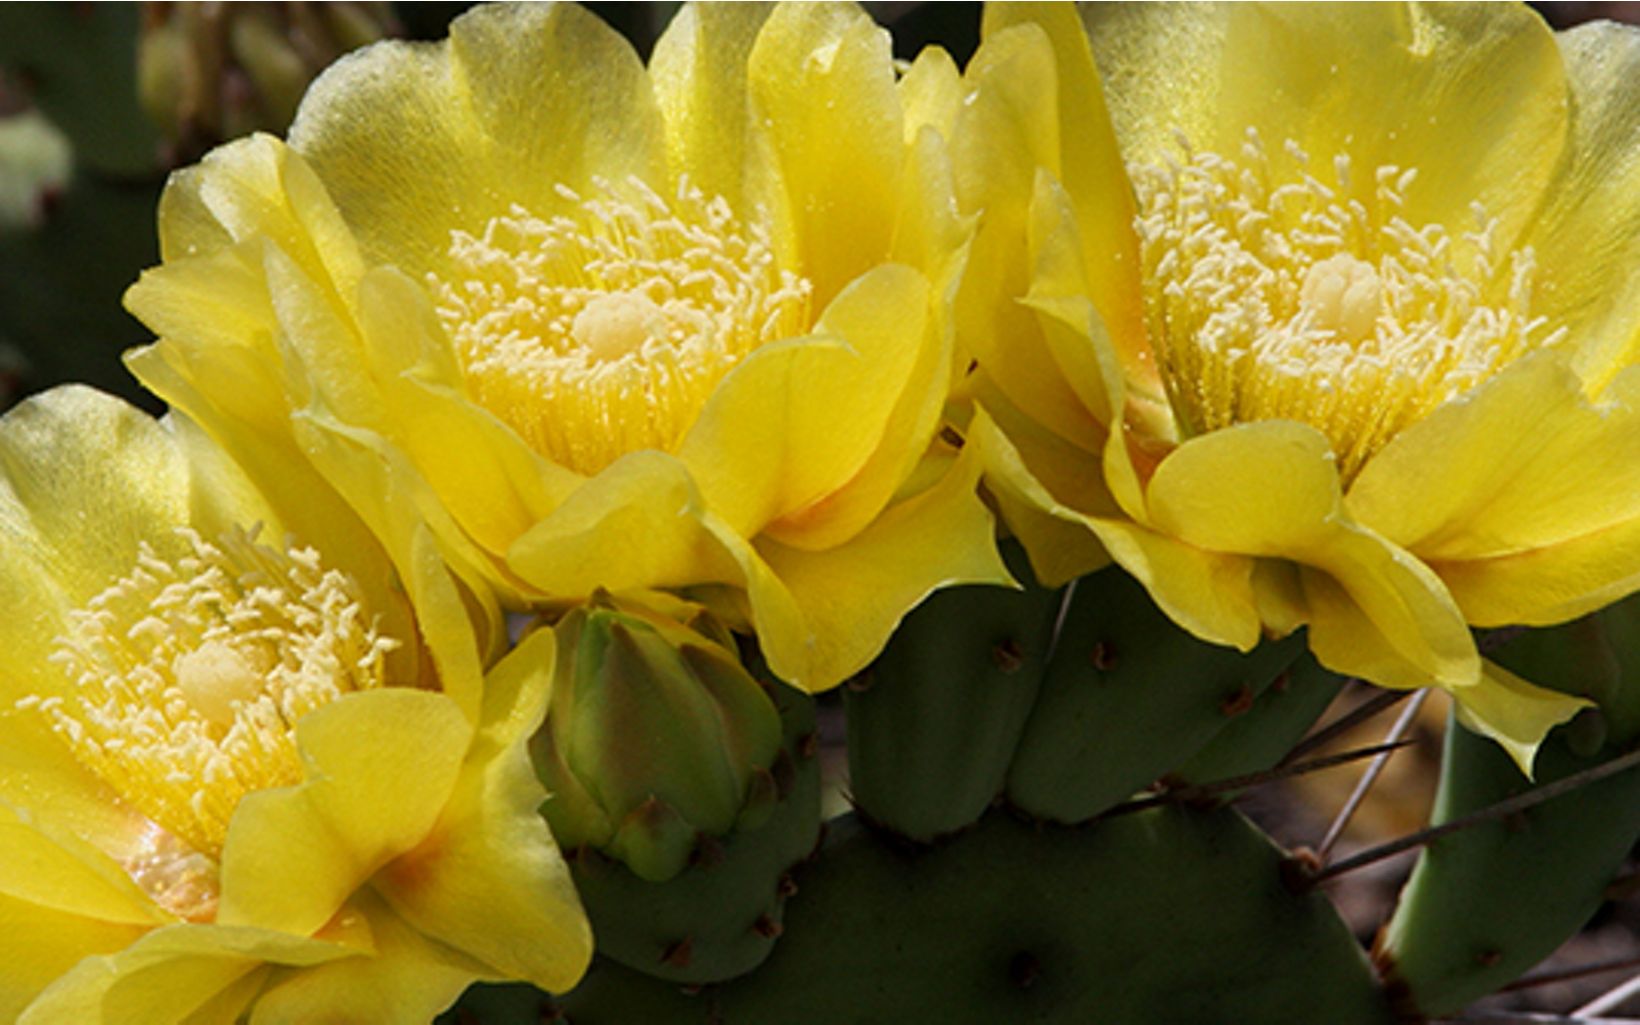 Prickly Pear Cactus in Bloom Ohio's native cactus, Opuntia humifusa.  Uncommon to see around the state except for areas with sandy soils such as the Oak Openings in northwest Ohio. © Angie Cole